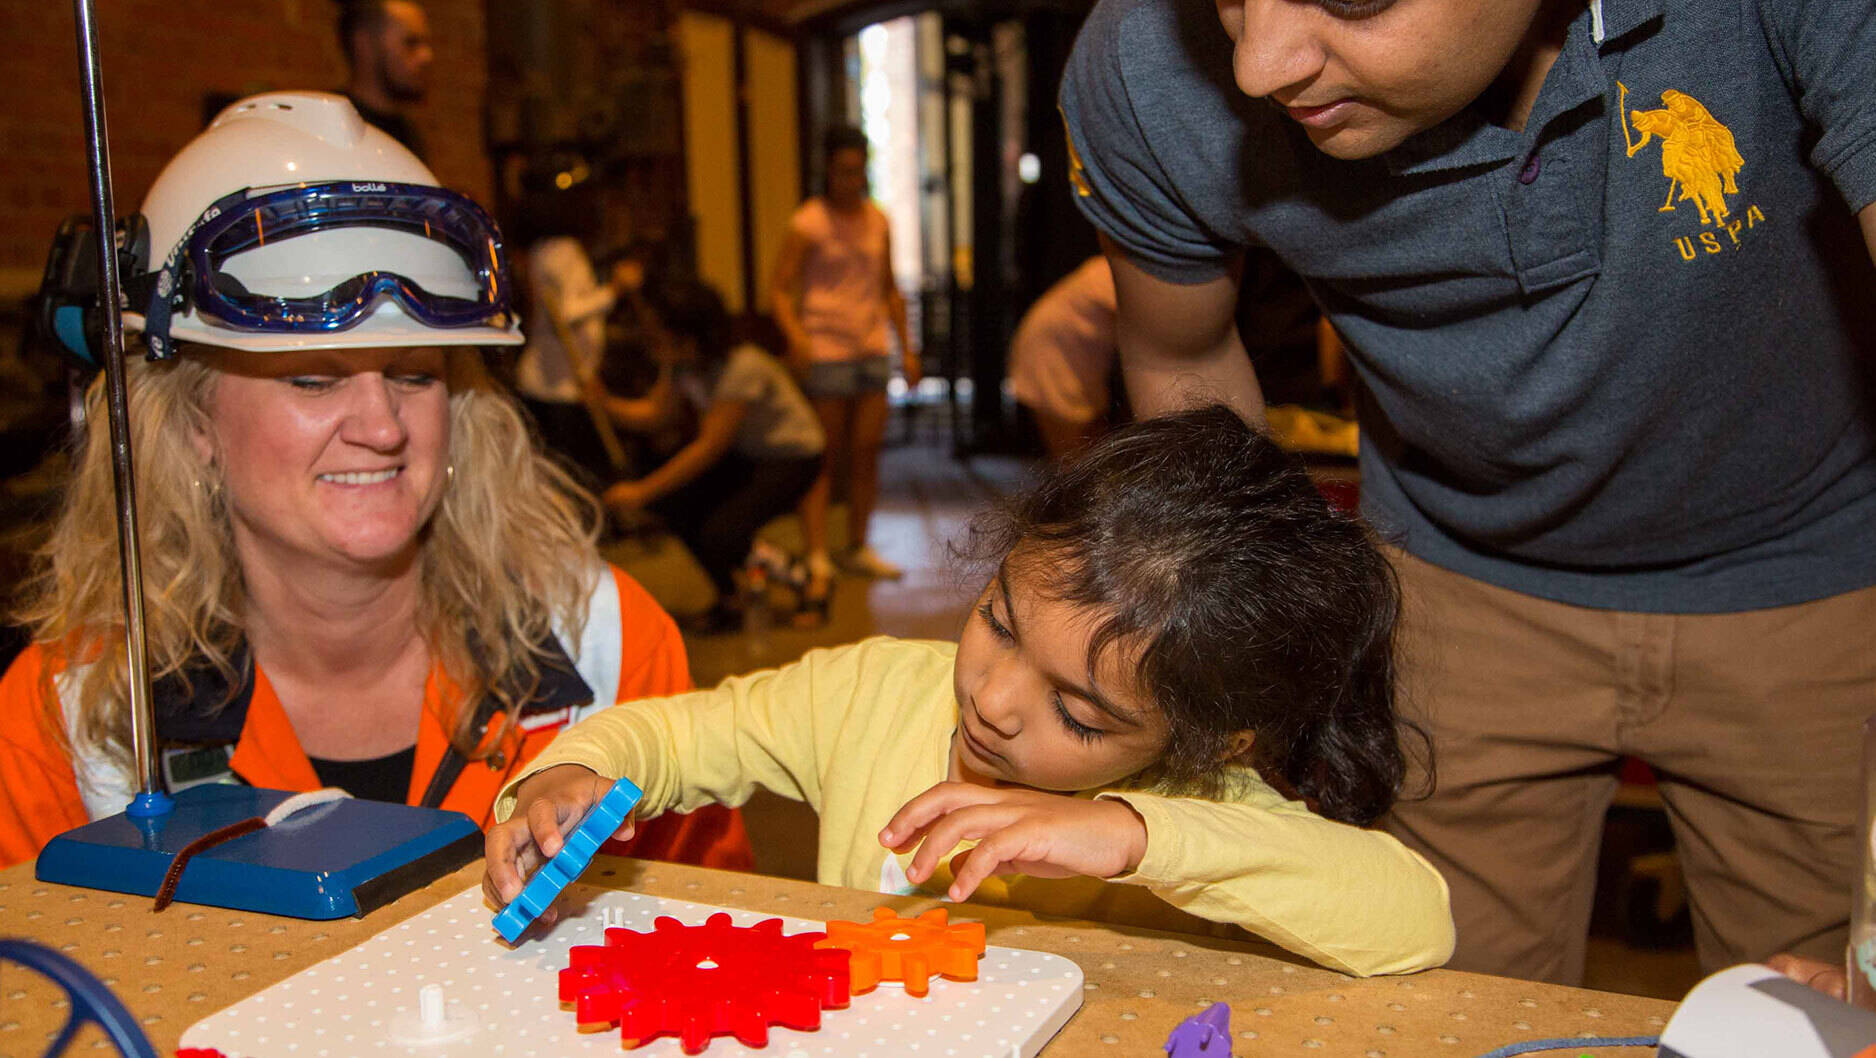 Image Photo — A young Scienceworks visitor demonstrates her puzzle skills to ExxonMobil’s Nikki Calcraft. “These activities have been designed to ignite curiosity in the next generation.” Photo by: Rod Start/Museums Victoria